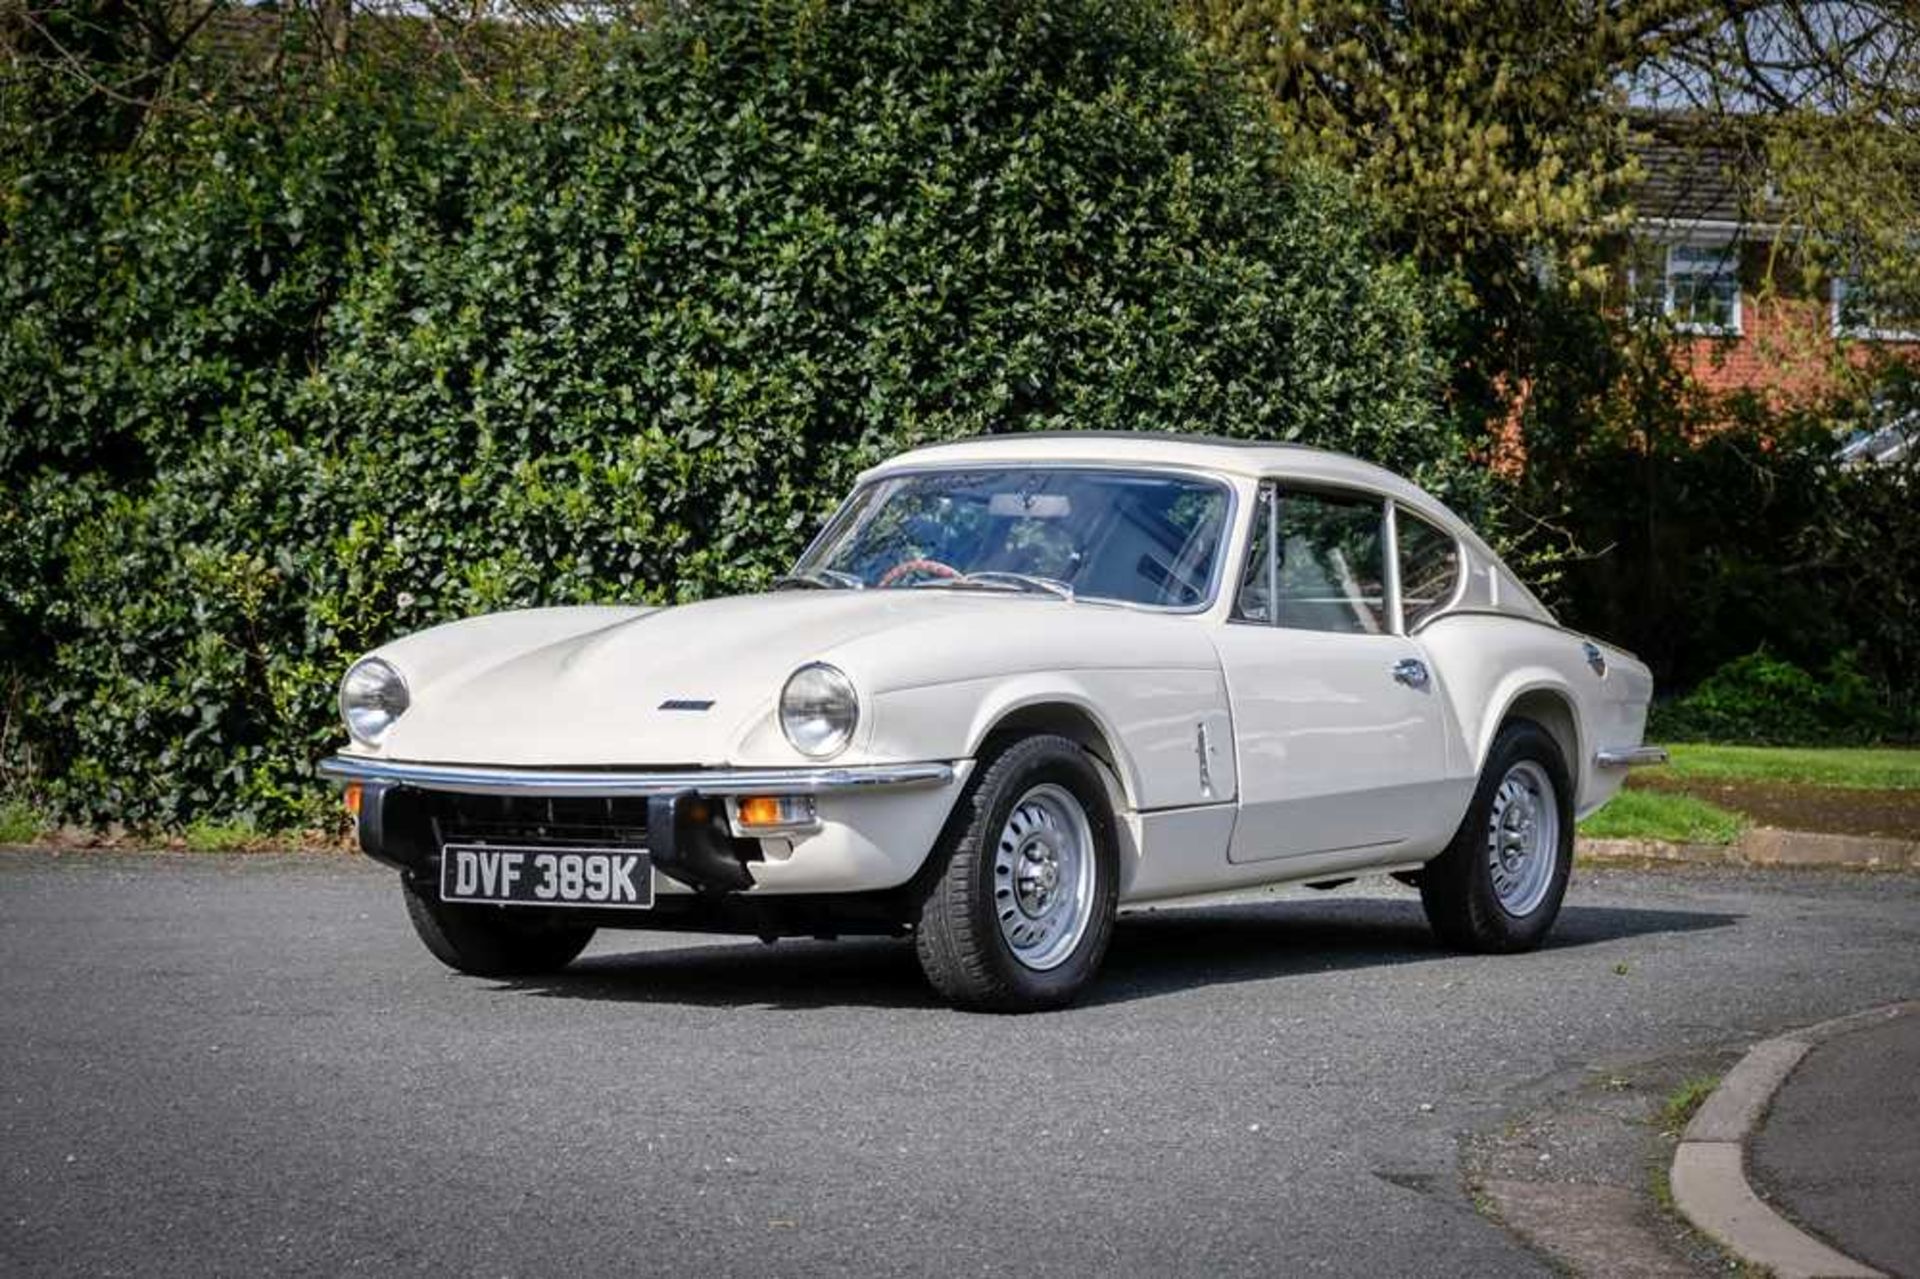 1971 Triumph GT6 MkIII Fresh from a full professional restoration - Image 9 of 106